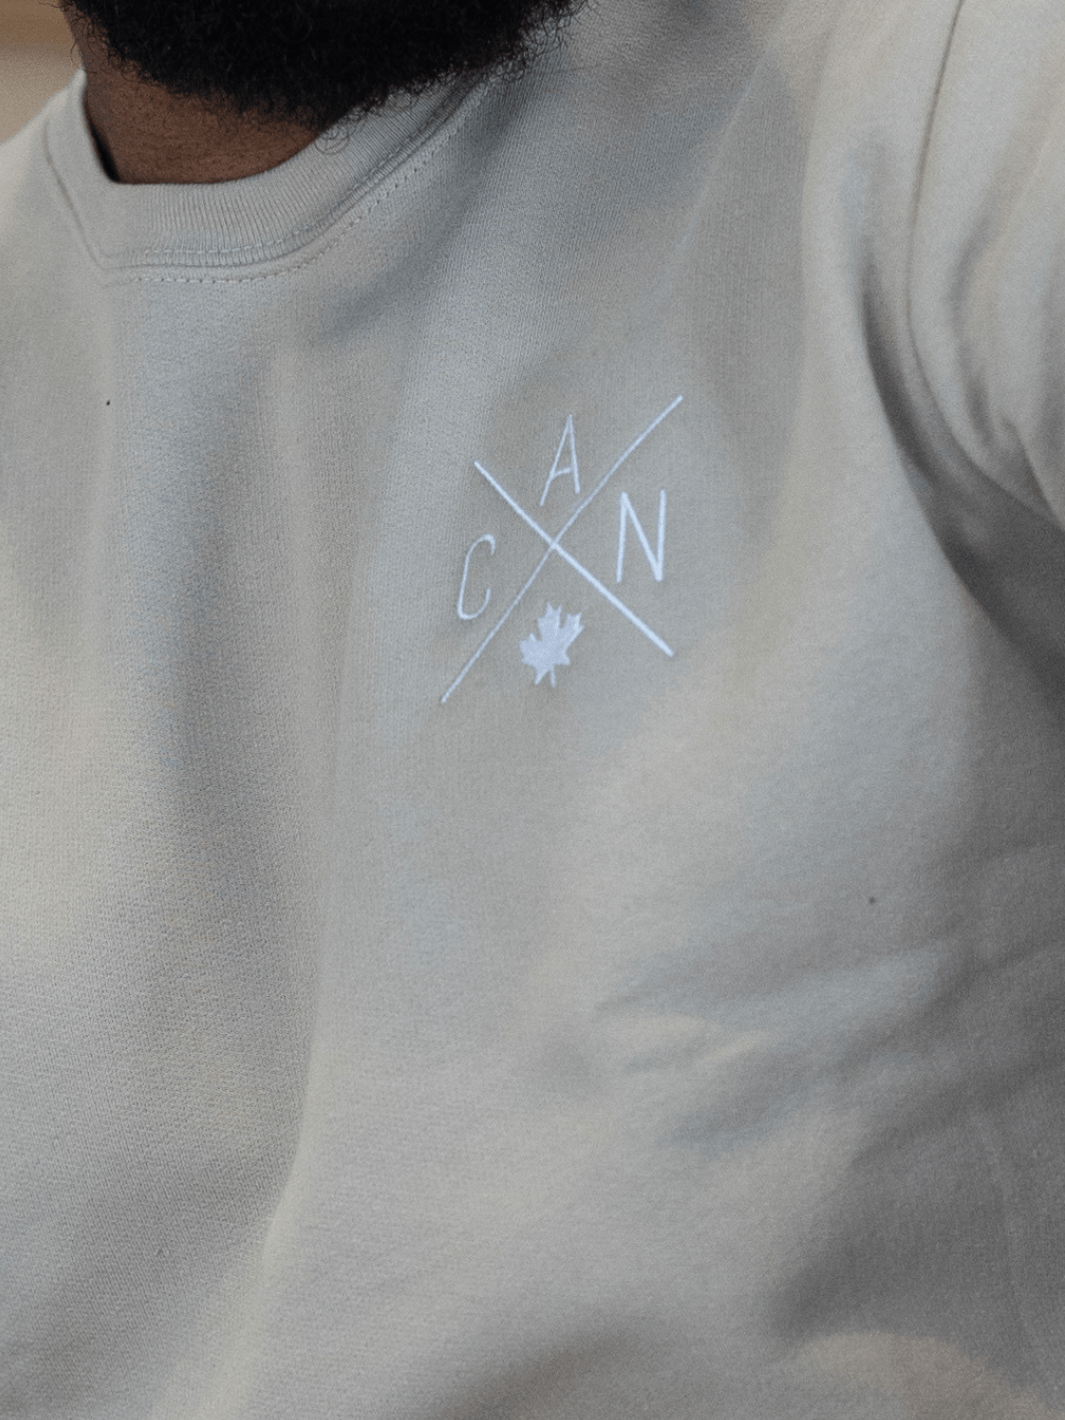 CAN Crewneck - Sand - Local Laundry